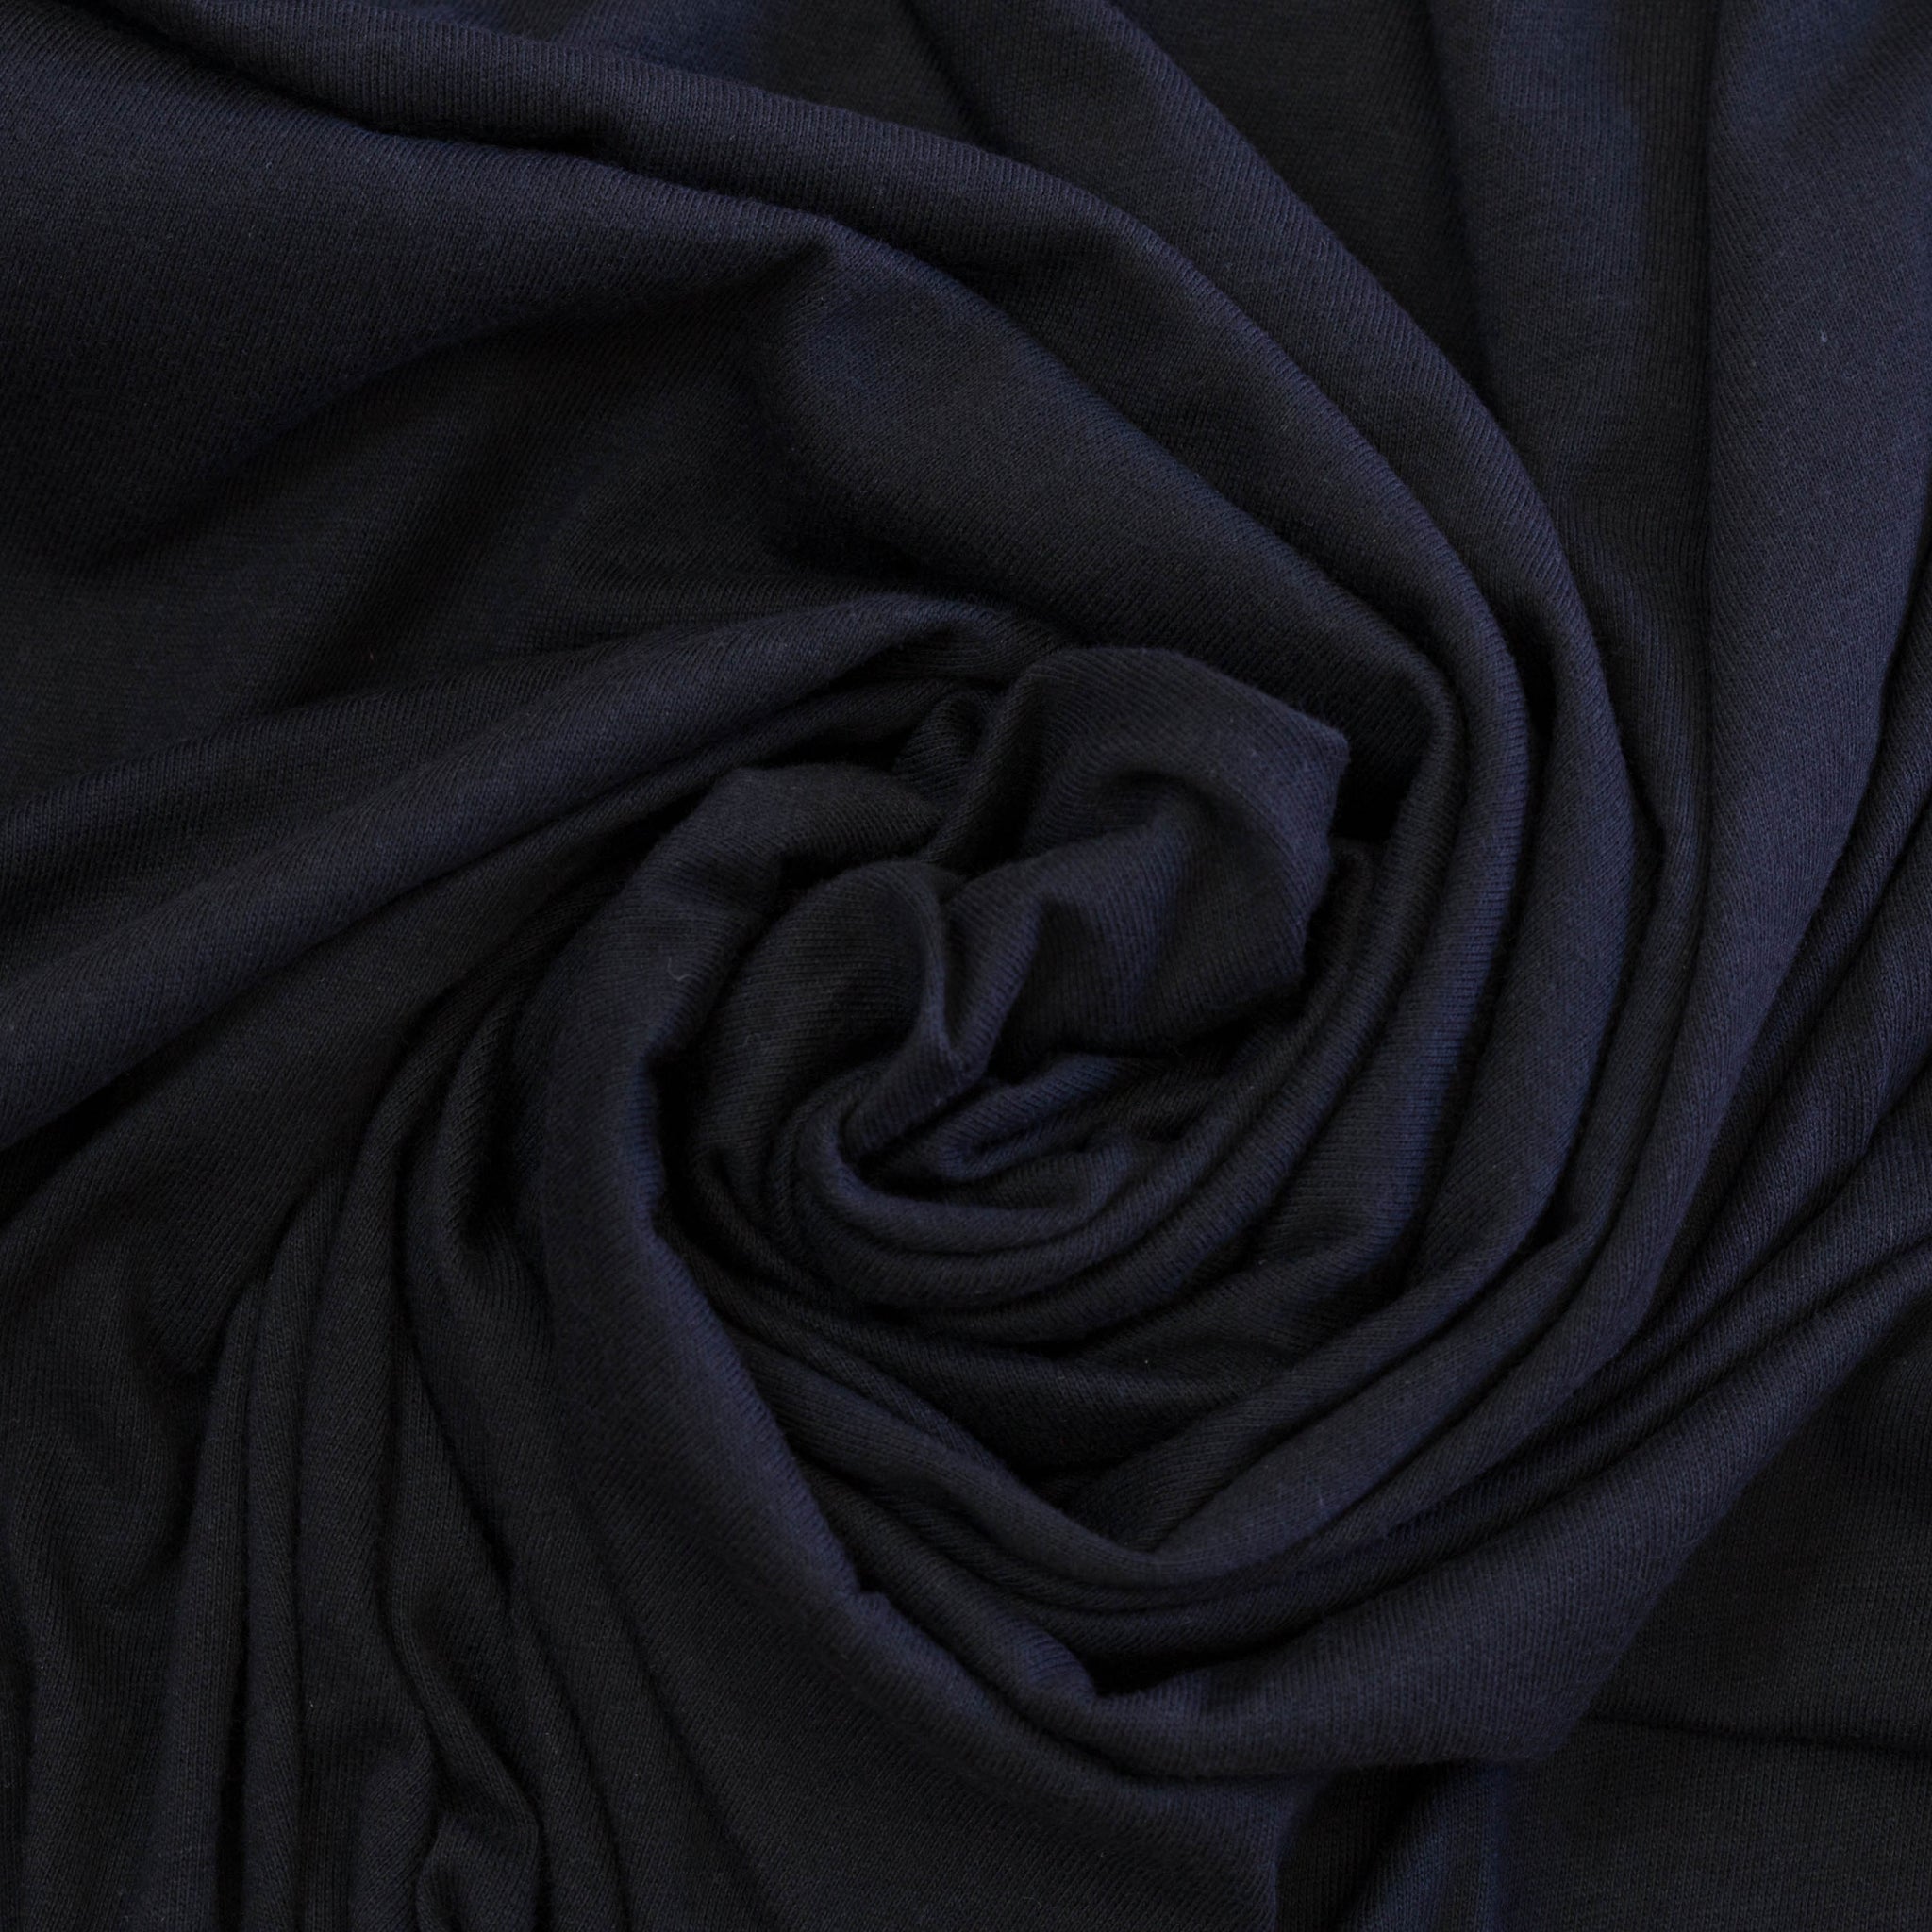 Soft Single Jersey - 100% Cotton - used as bra liner, soft cup or gusset  fabric etc